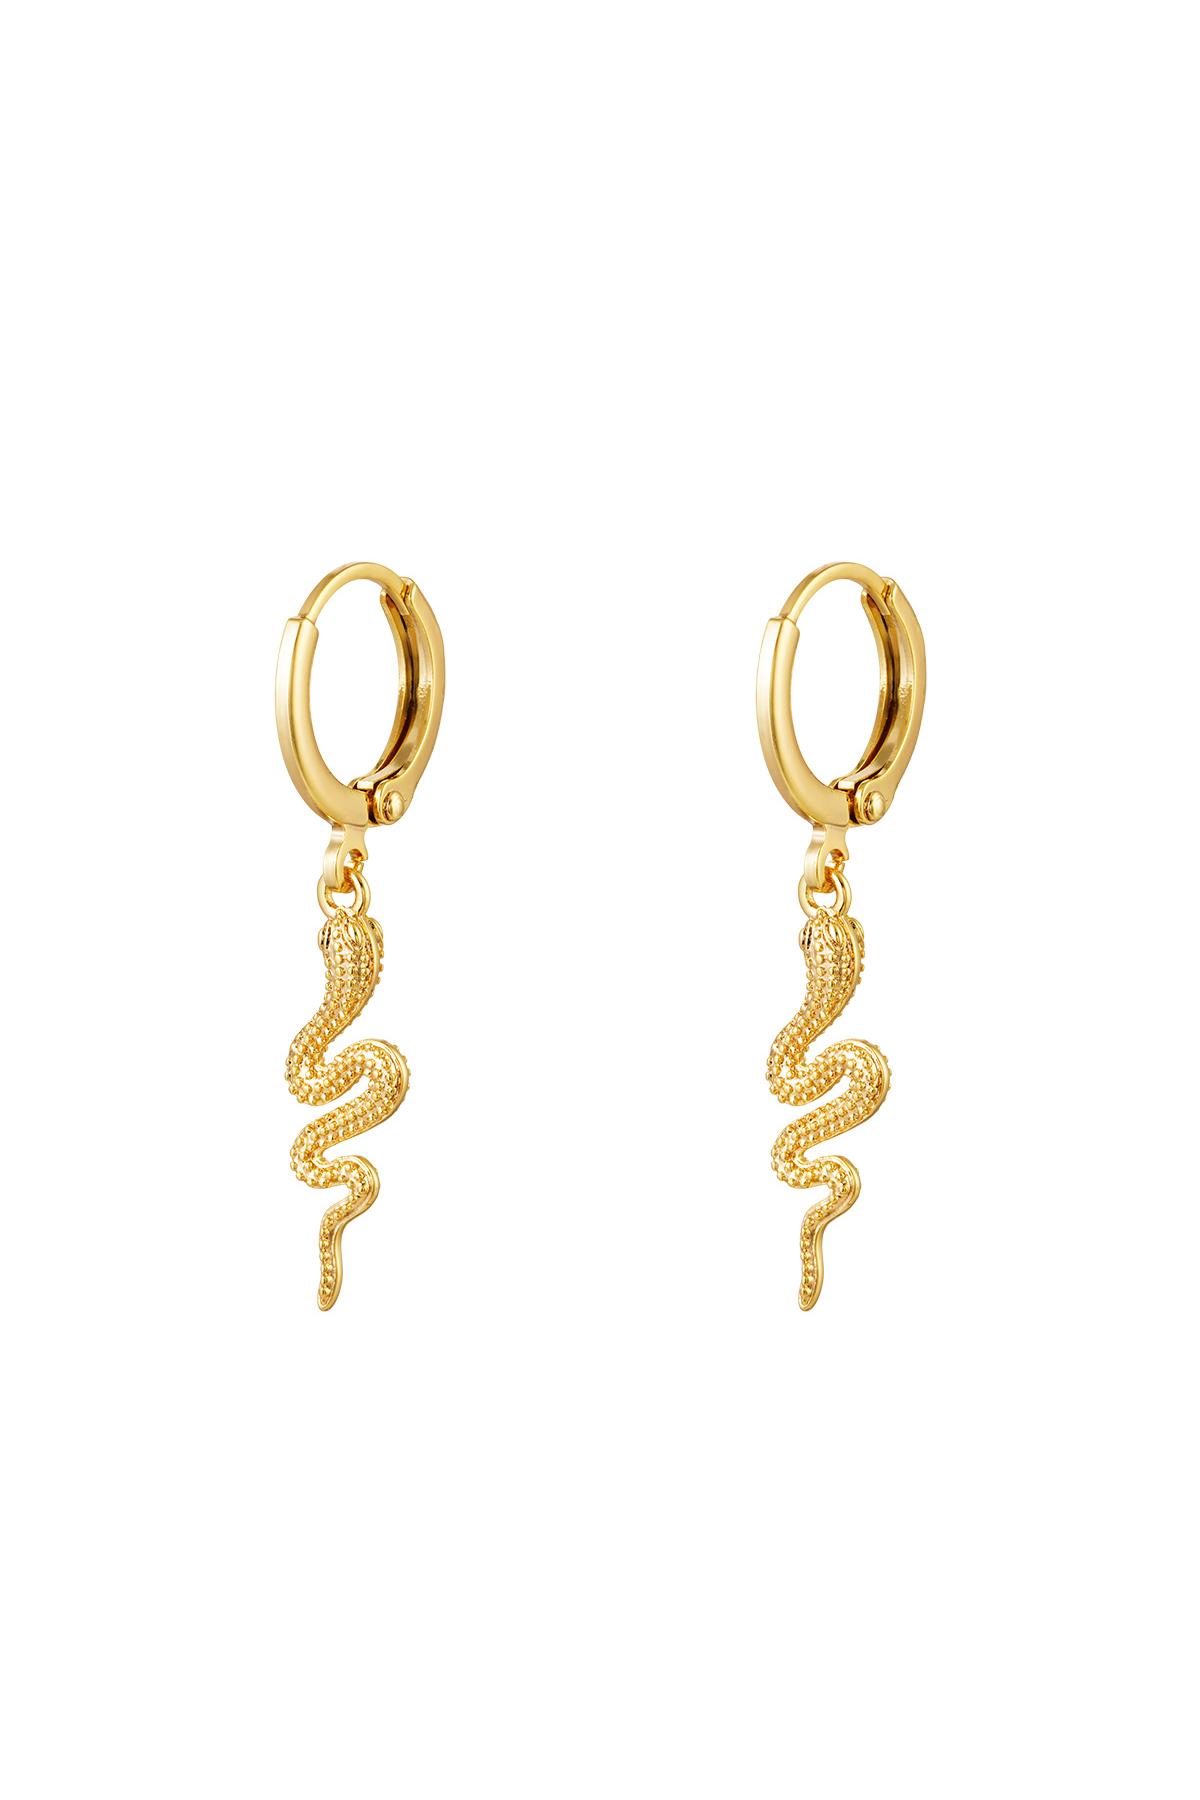 Earrings Special Snake Gold Gold Plated h5 